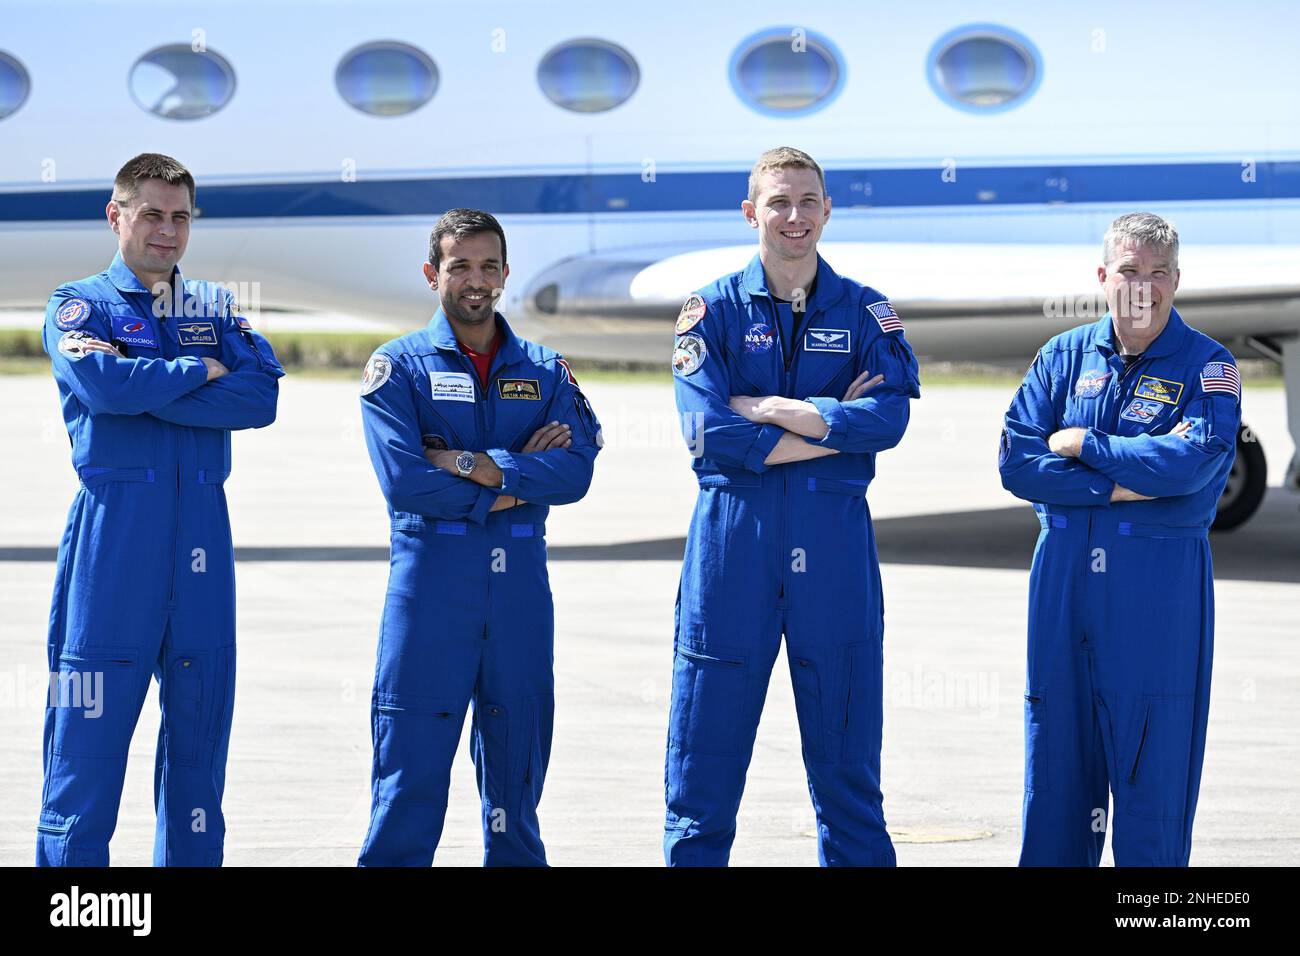 Kennedy Space Center, Florida, USA. 21st February, 2023. Russian Cosmonaut Andrey Fedyaev, UAE Astronaut Sultan Al Neyadi and NASA Astronauts Stephen Bowen and Warren Hoburg pose for the media after arriving at the Kennedy Space Center, Florida on Tuesday, February 21, 2023.The crew will be launched to the International Space Station on the SpaceX Crew Dragon spacecraft. Photo by Joe Marino/UPI Credit: UPI/Alamy Live News Stock Photo